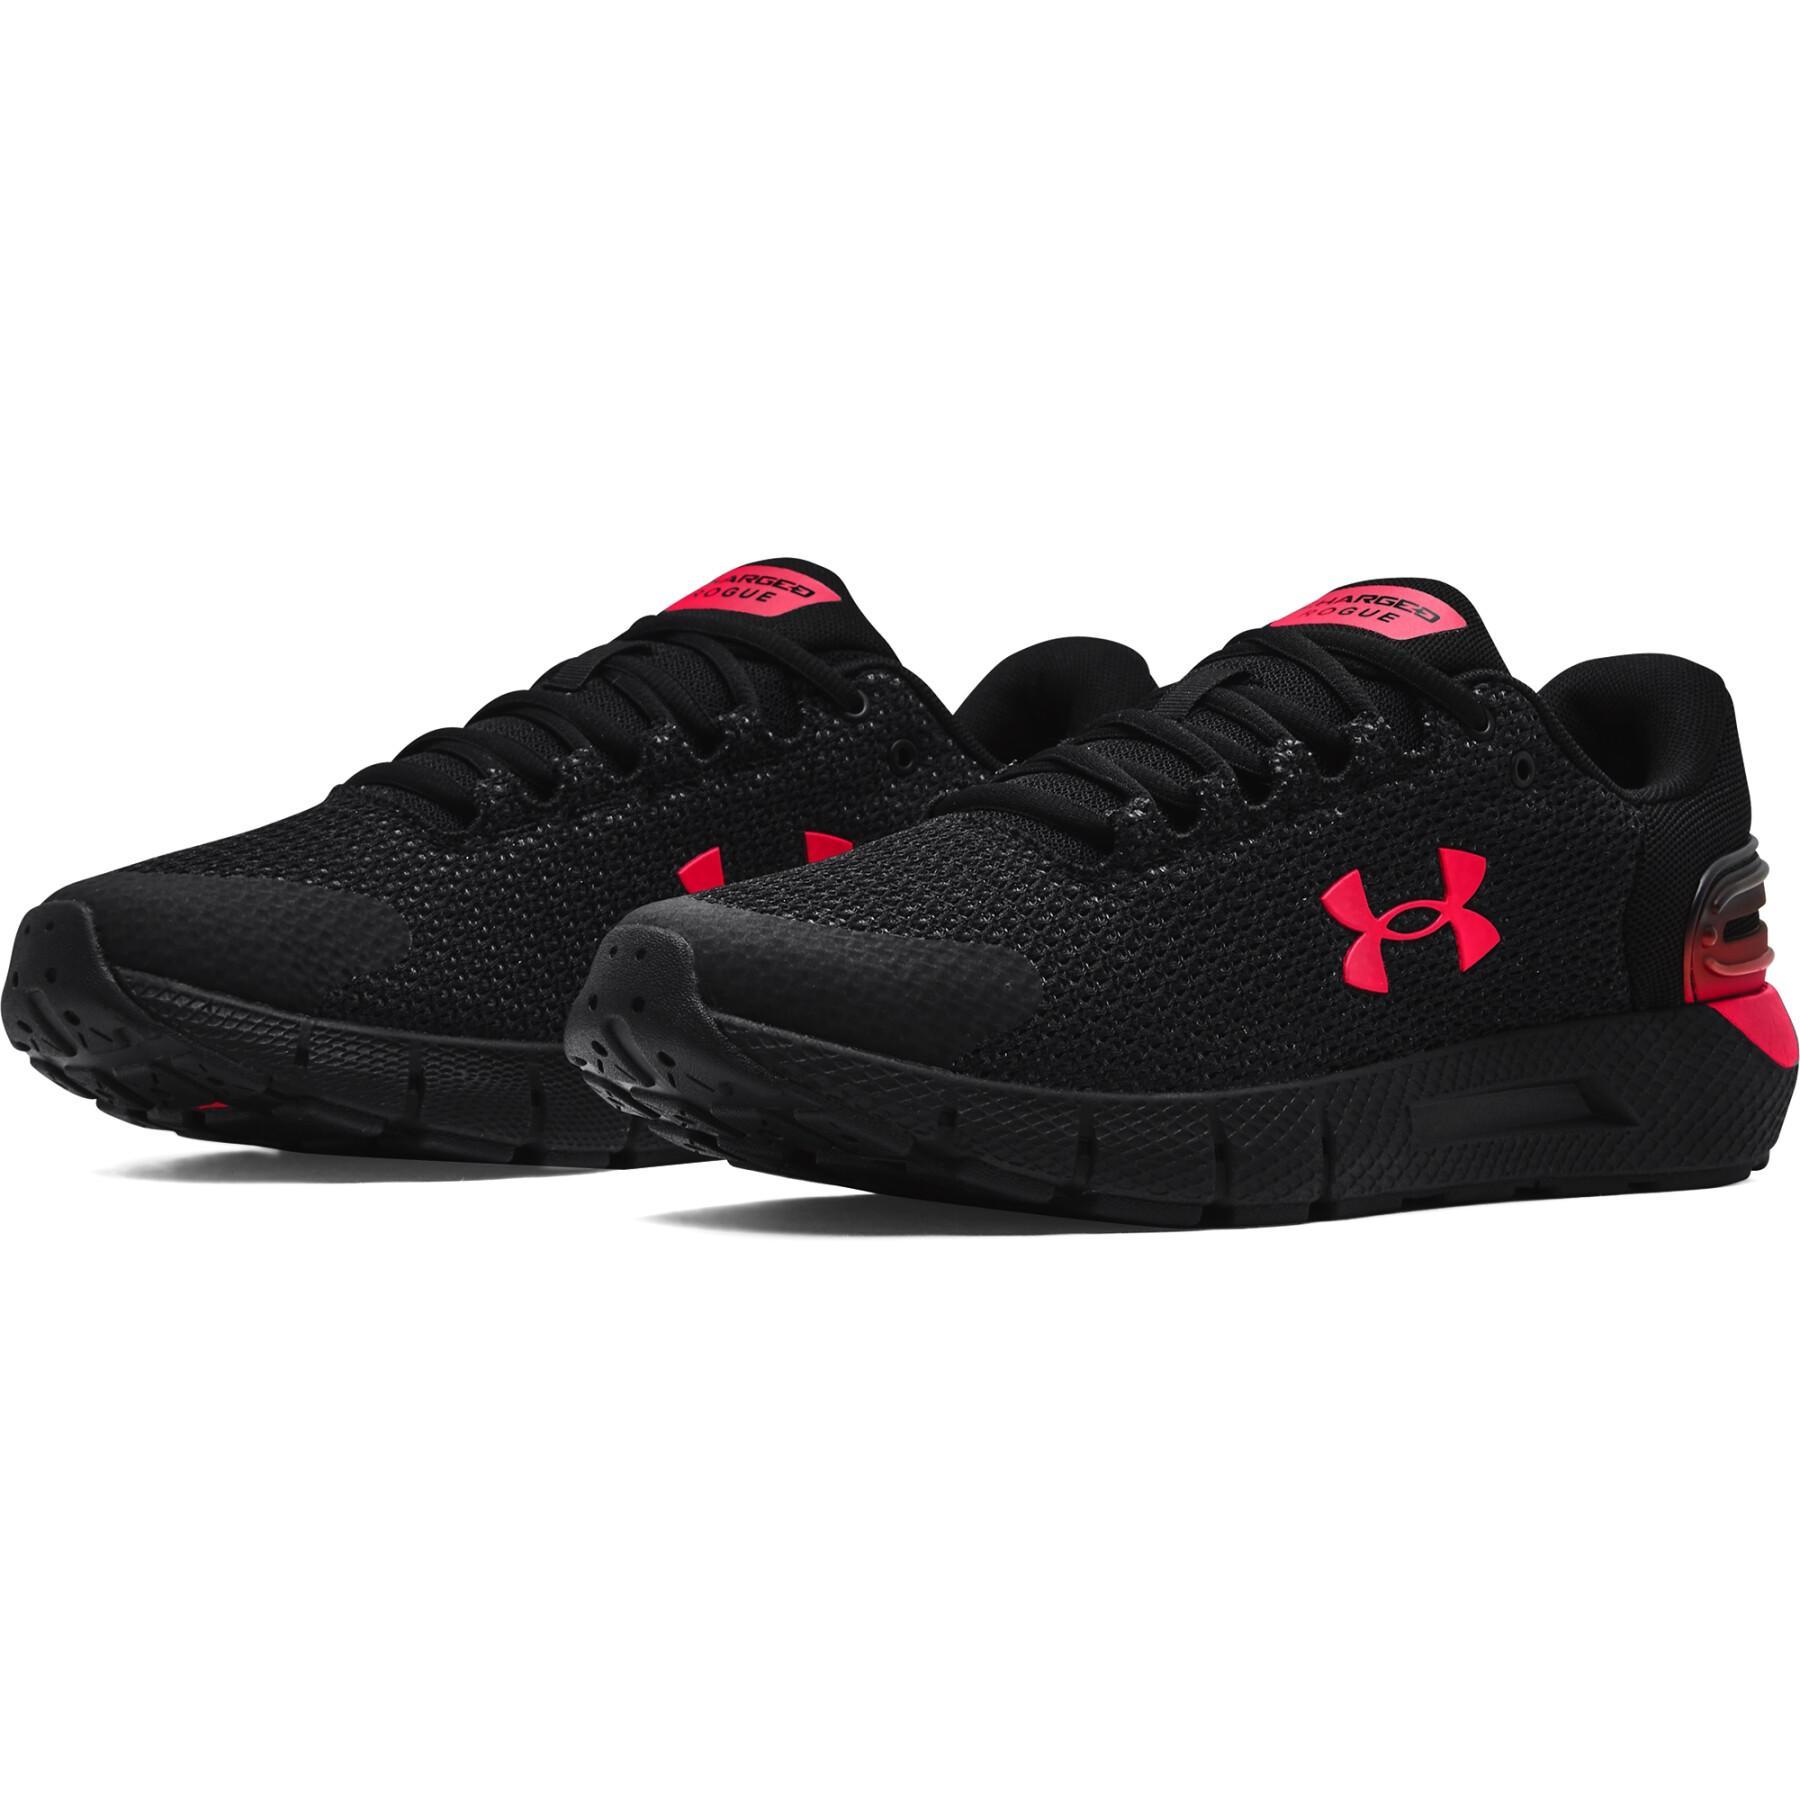 Schoenen Under Armour Charged Rogue 2.5